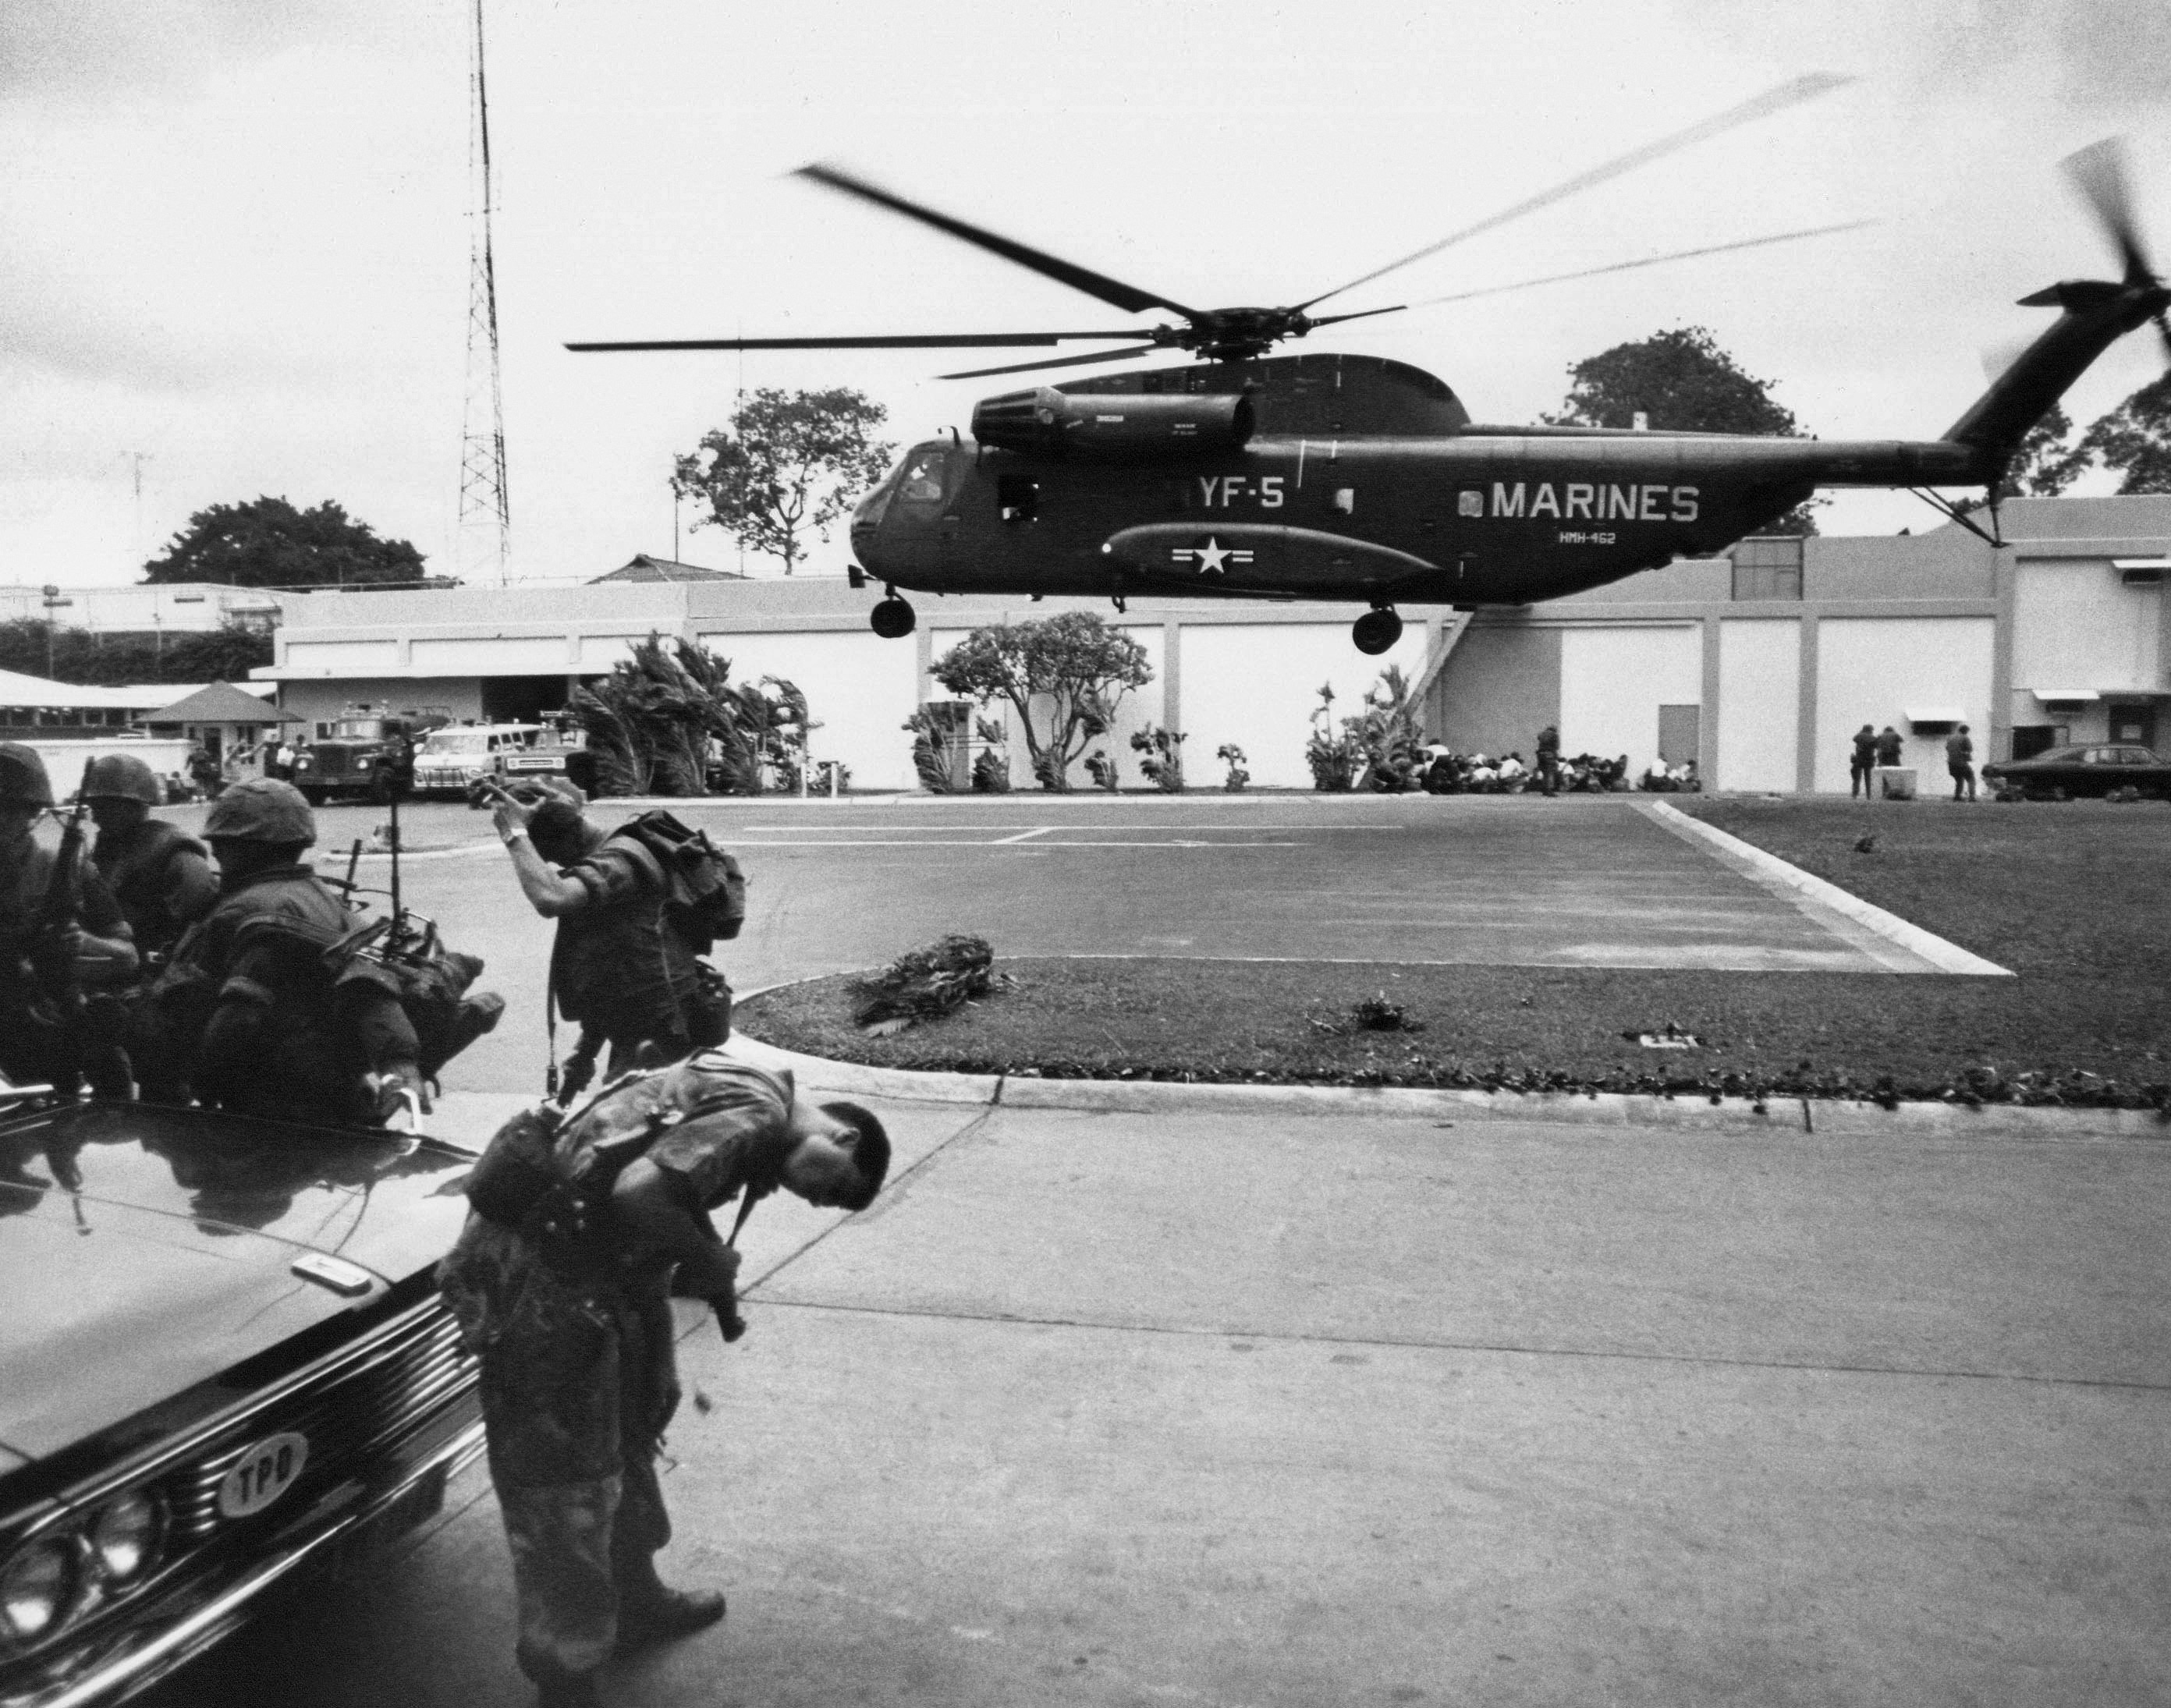 In this April 29, 1975, file photo, a helicopter lifts off from the U.S. embassy in Saigon, Vietnam, during the evacuation of authorized personnel and civilians. (AP Photo/File)